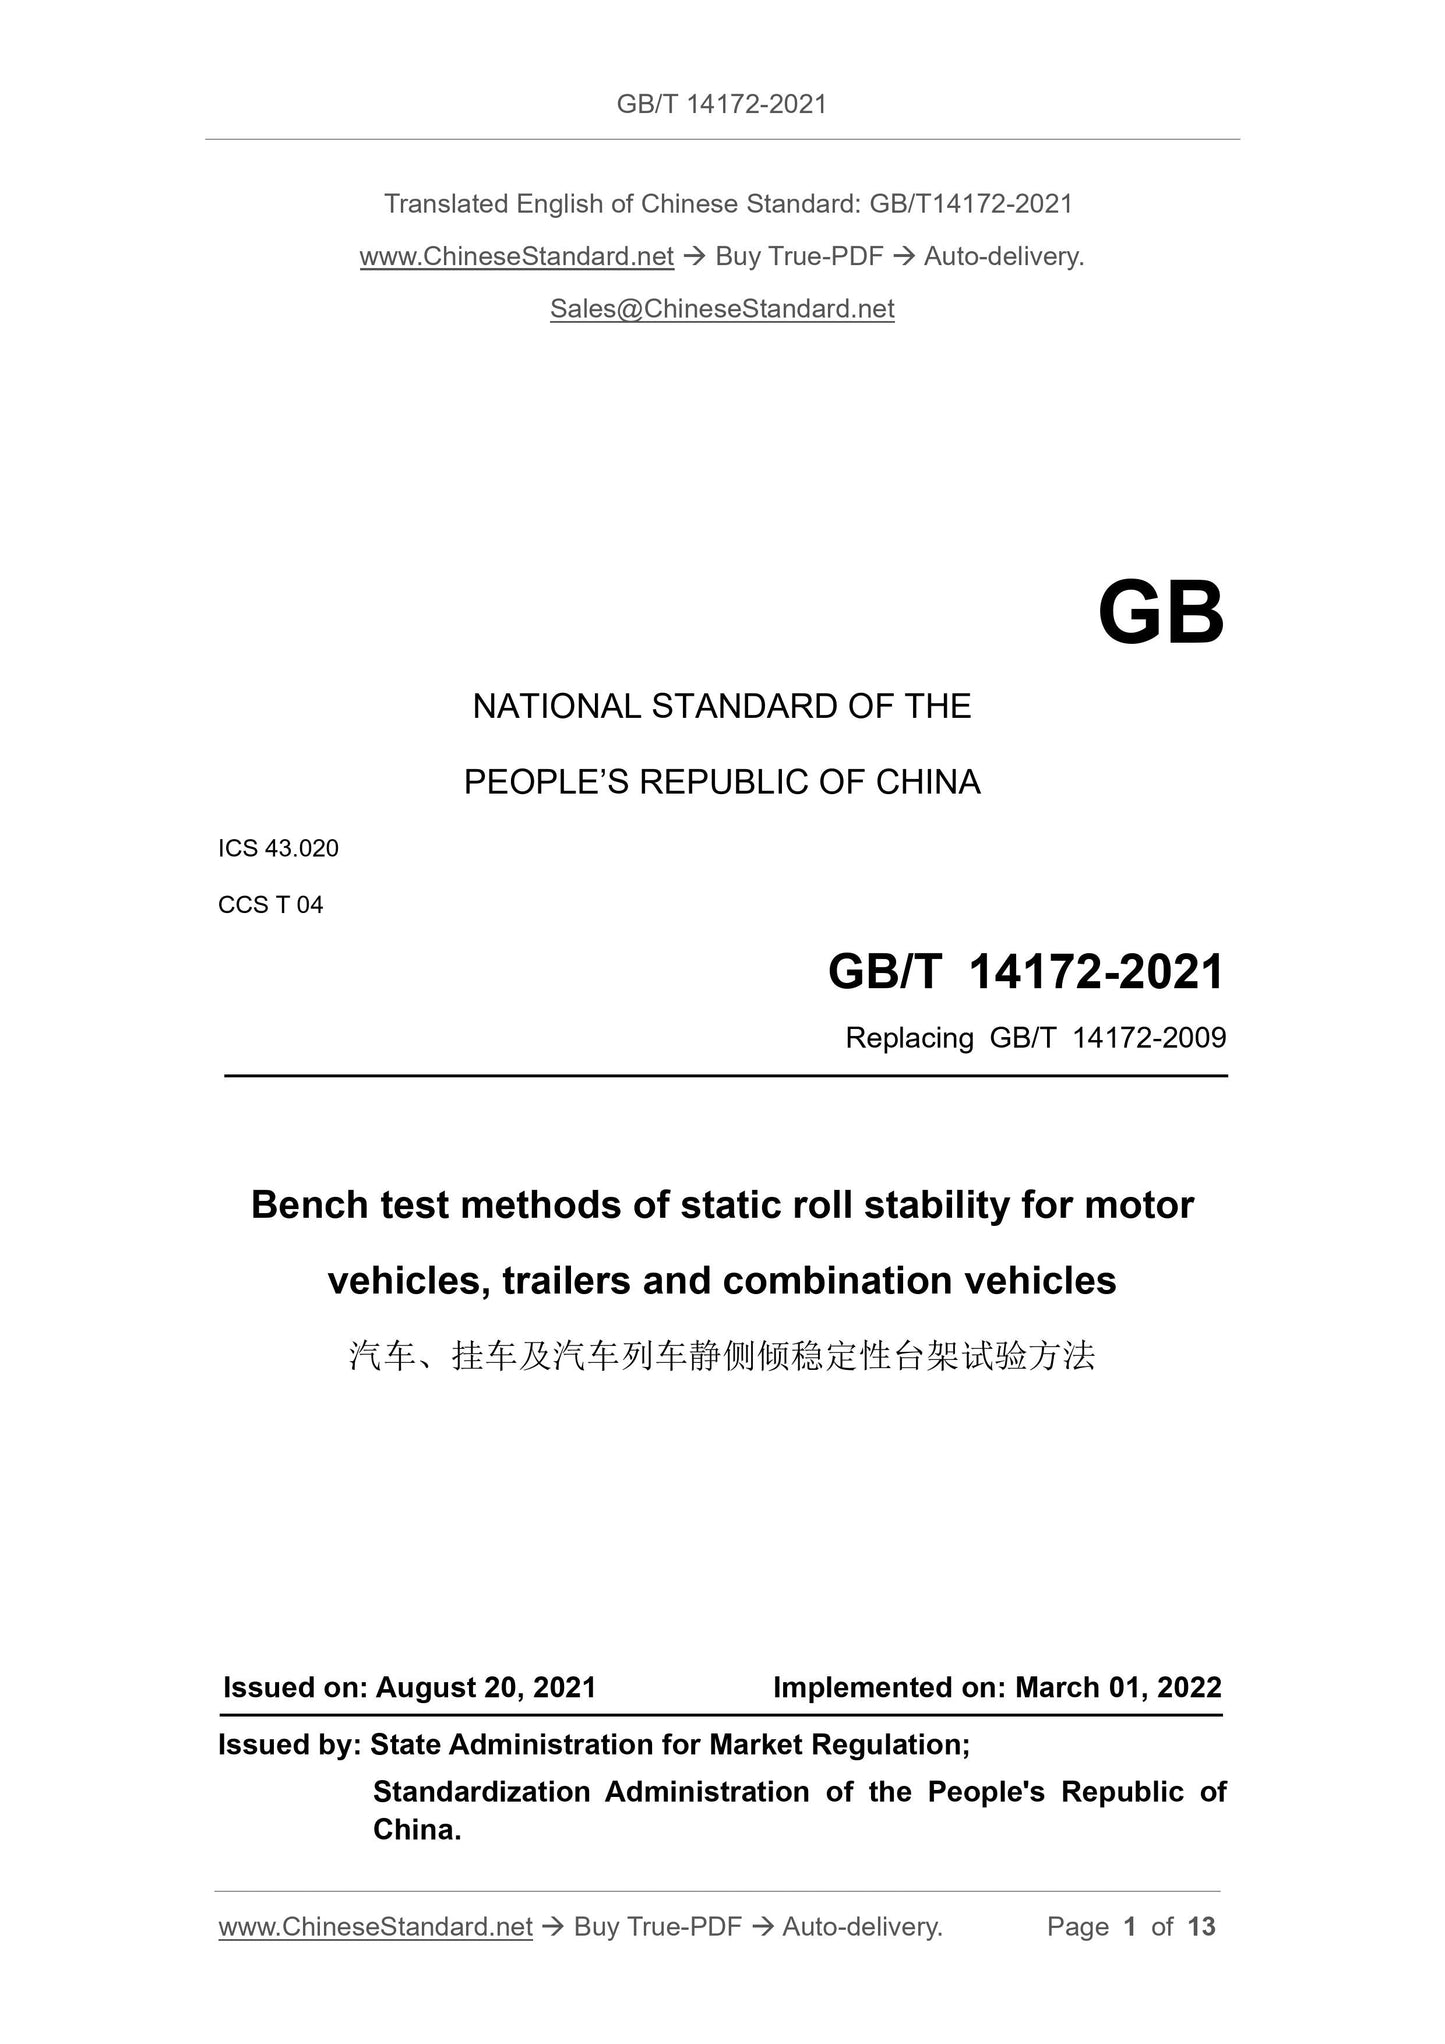 GB/T 14172-2021 Page 1